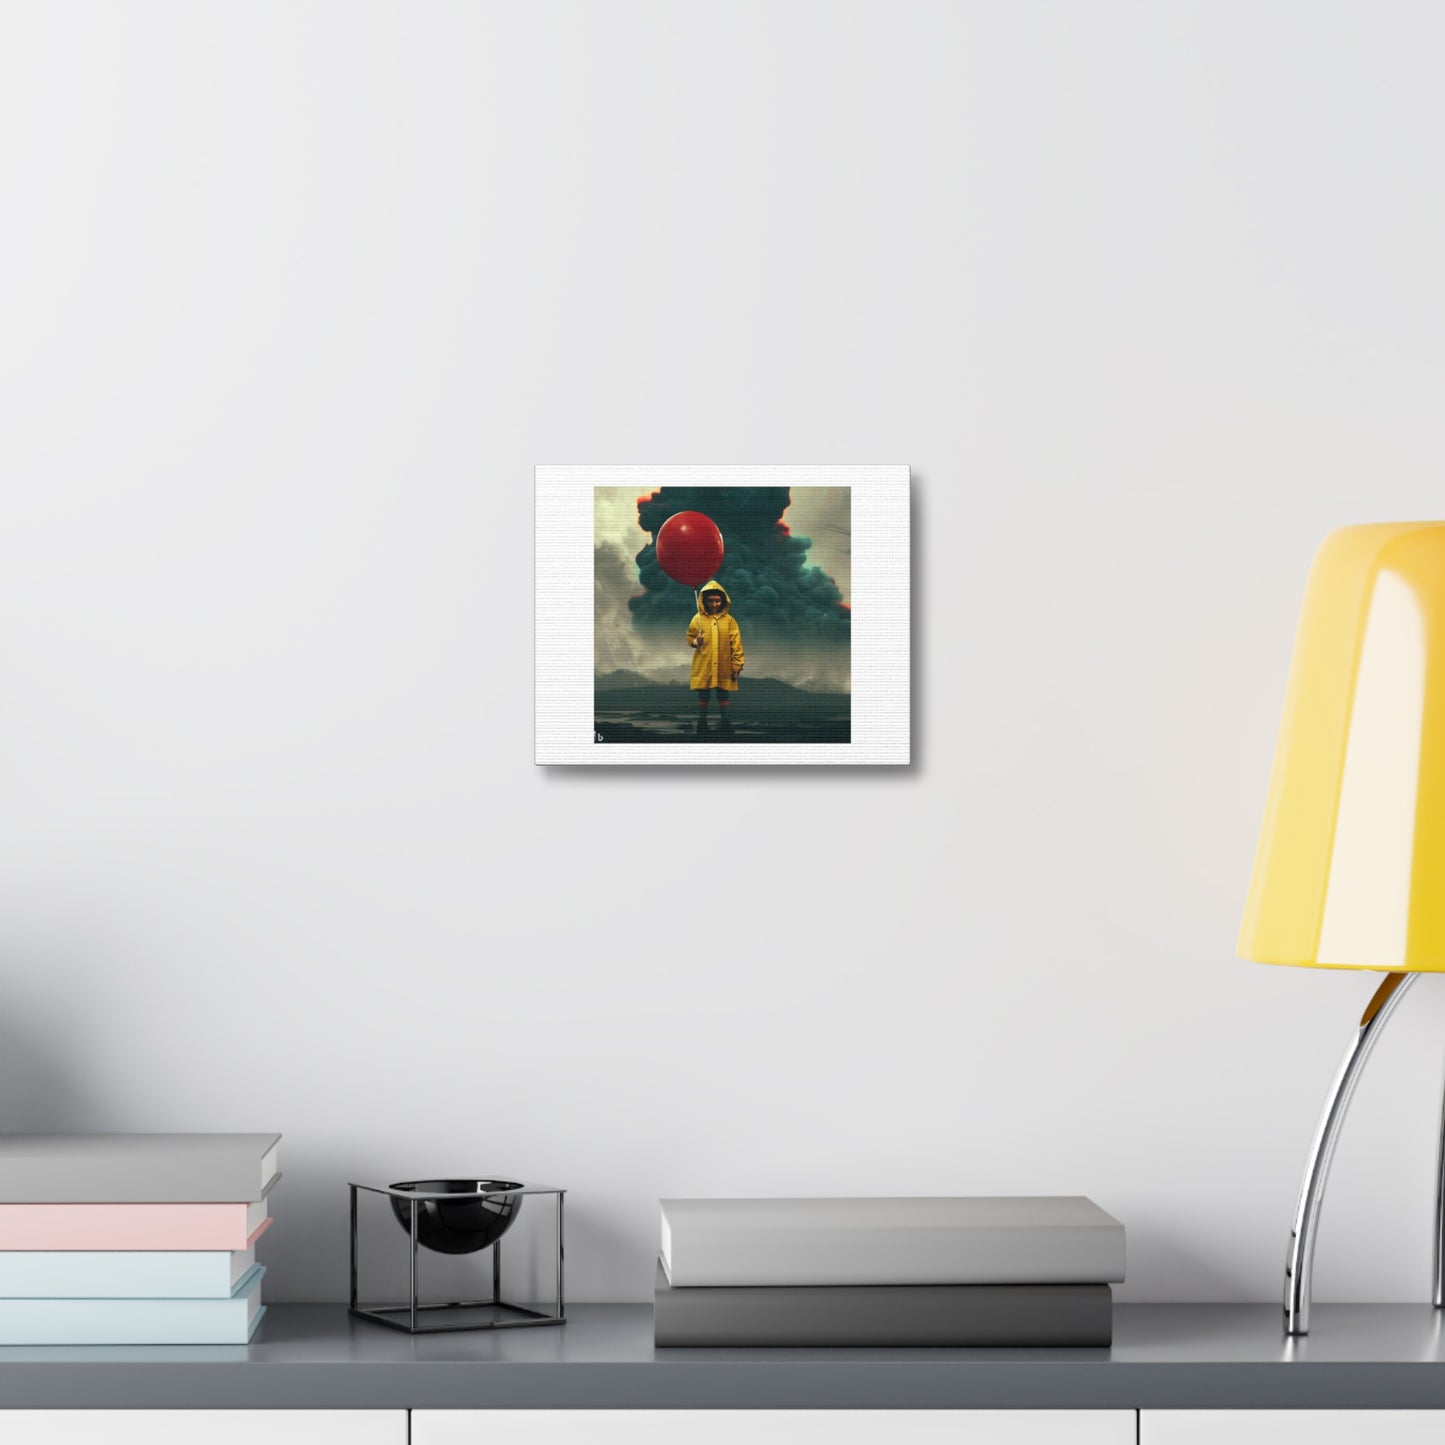 Boy Wearing Yellow Rain Coat Holding a Red Ballon in Front of a Smoking Volcano digital art 'Designed by AI' on Canvas